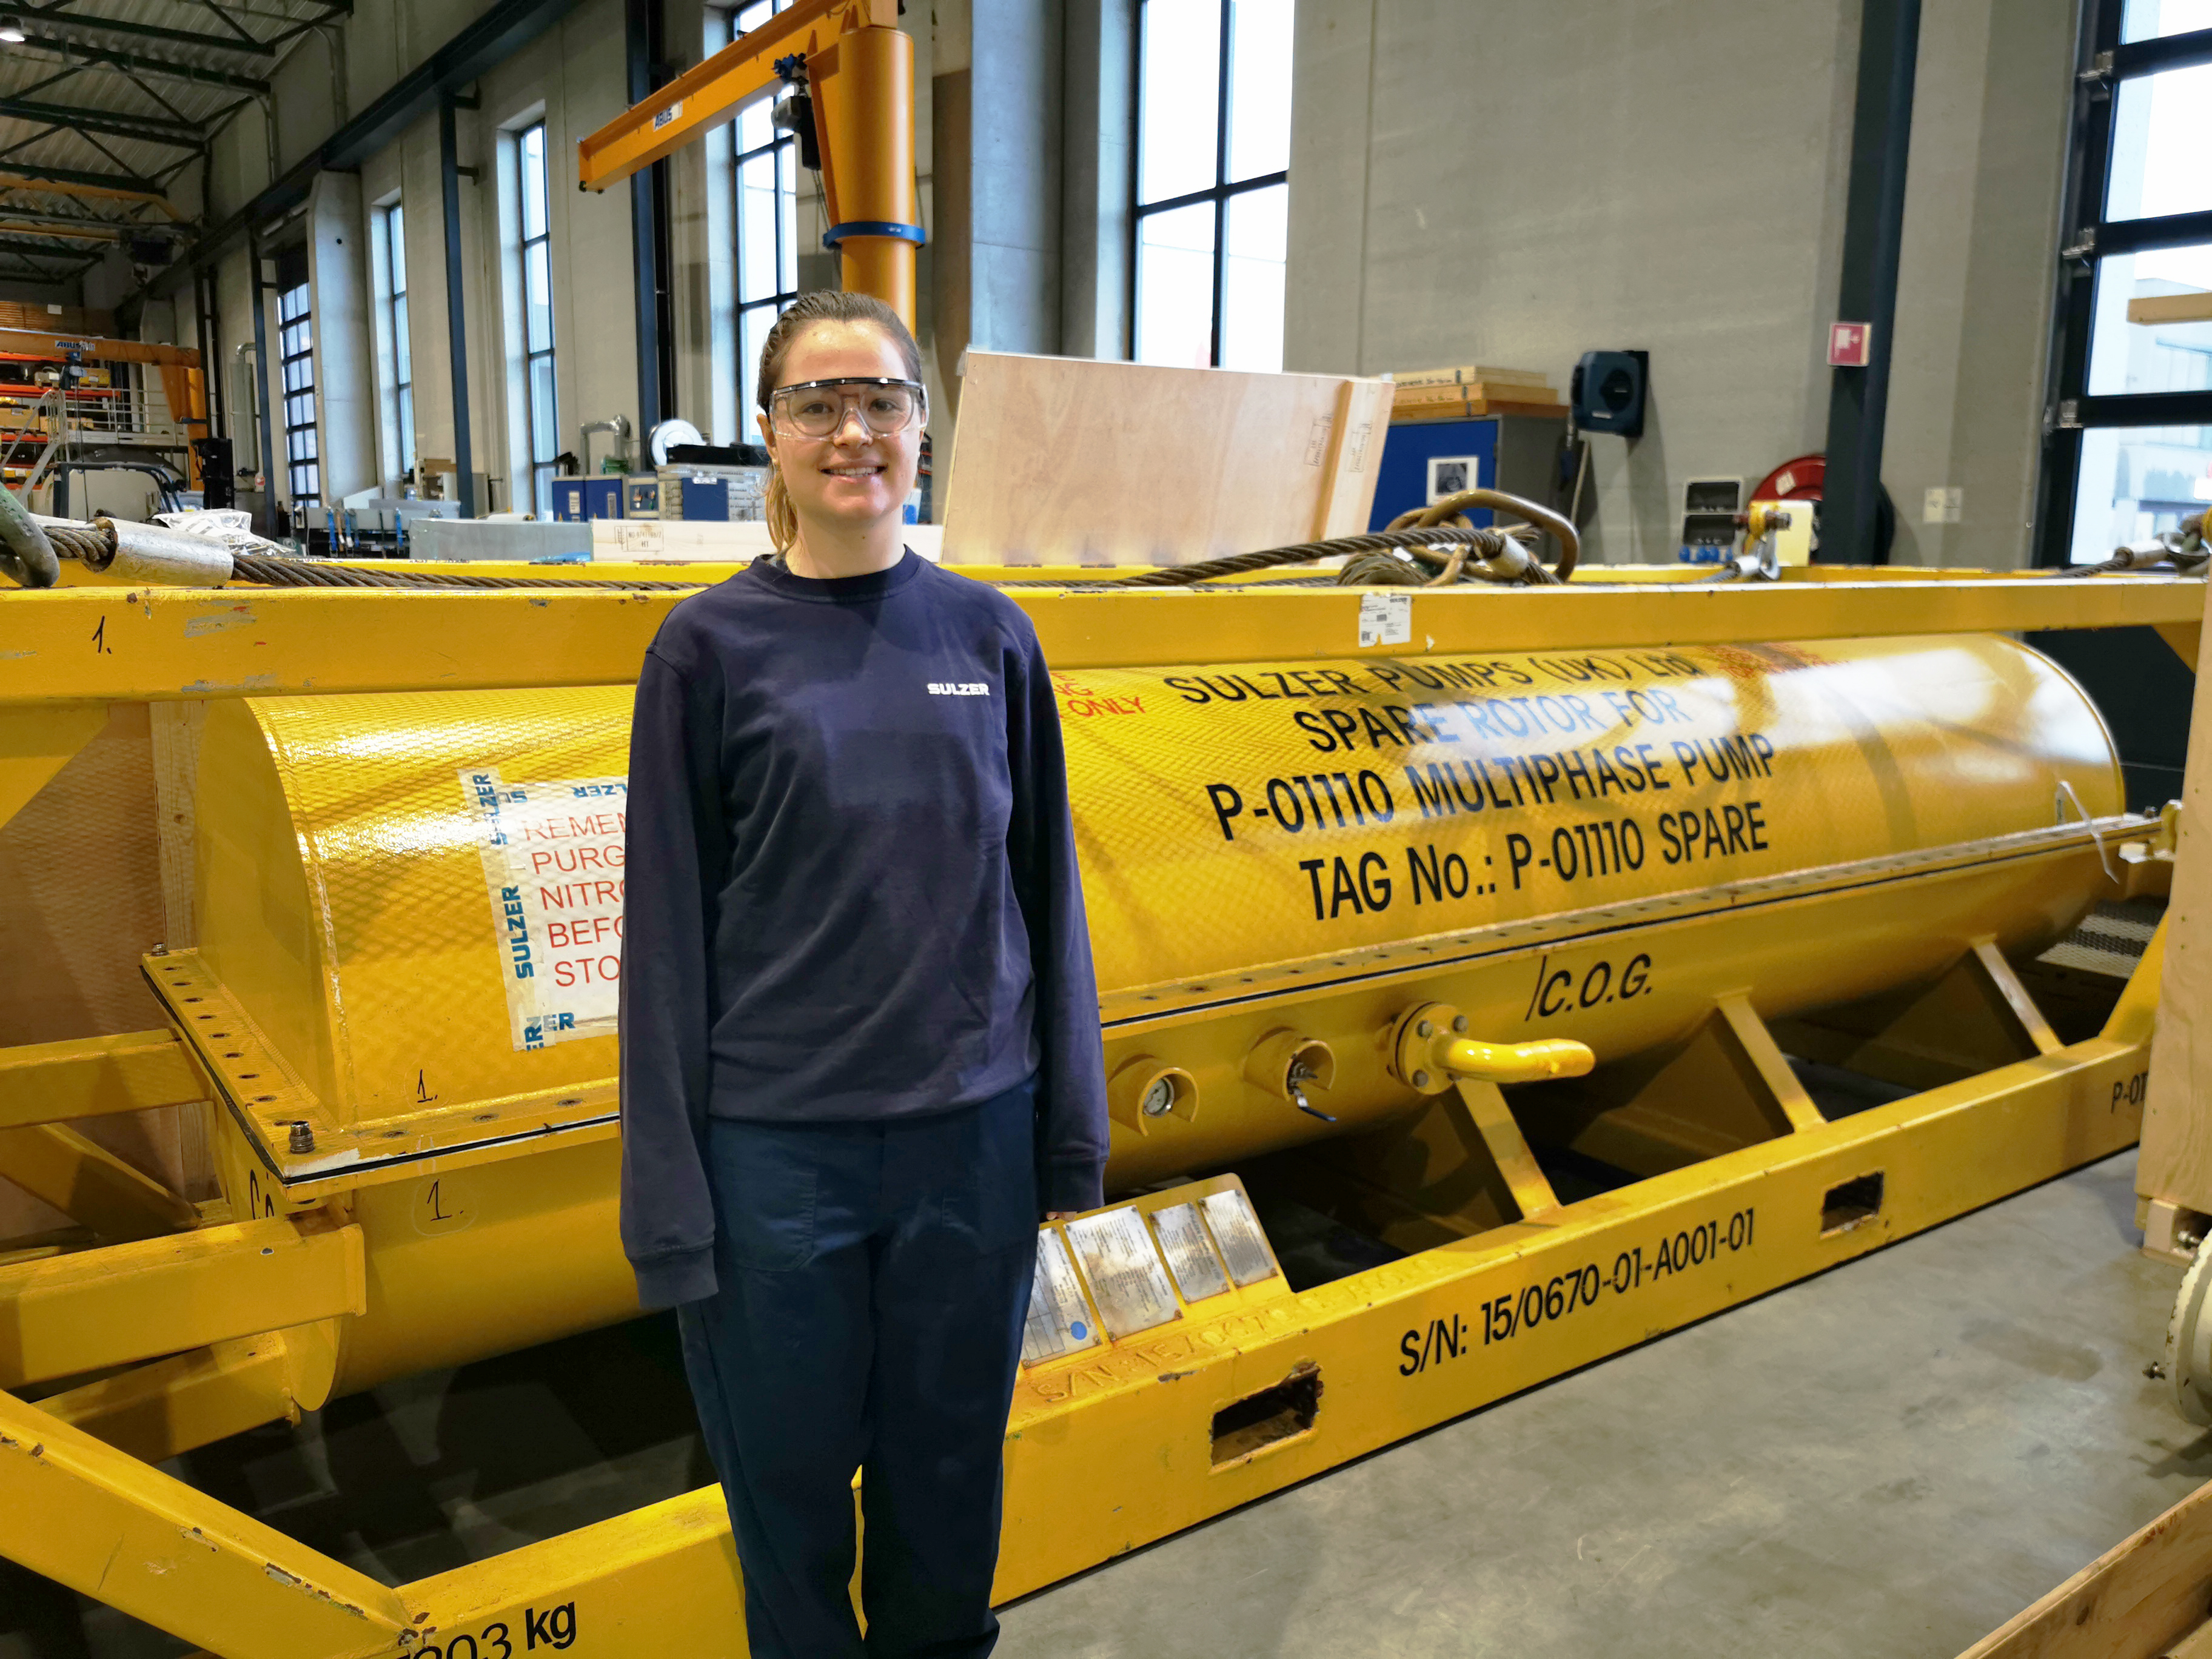 Celina Thuro, studying Mechanical Engineering at the DHBW University, began her journey at Sulzer Pumps in Bruchsal (Germany), and has moved to Norway to continue her experience